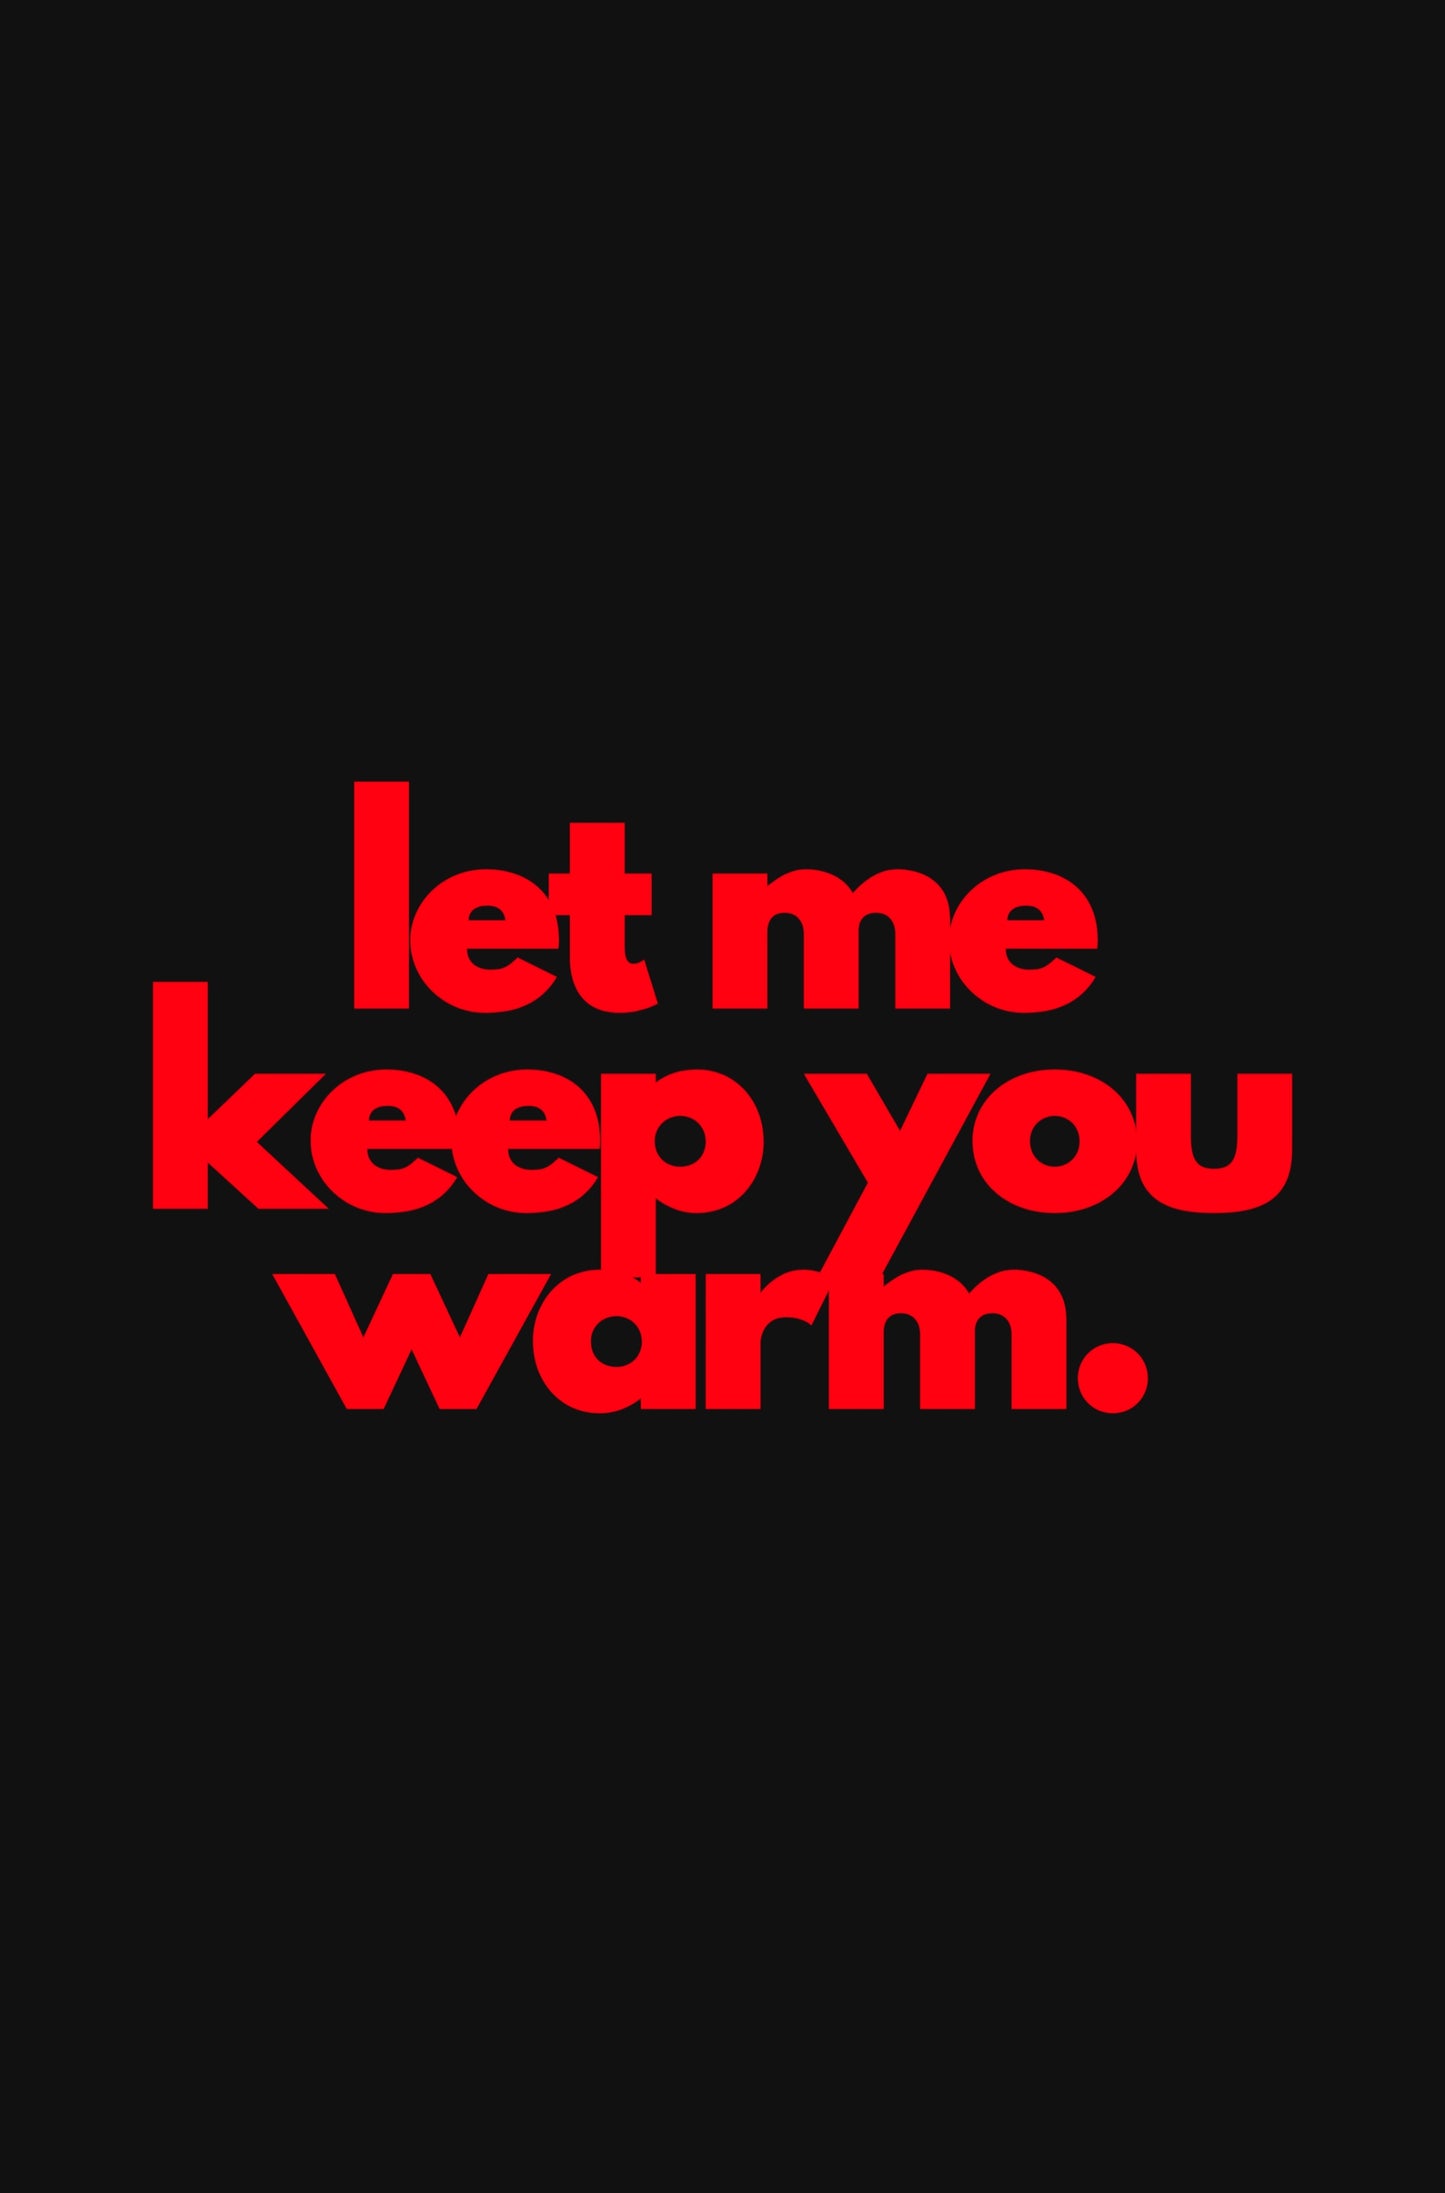 let me keep you warm.